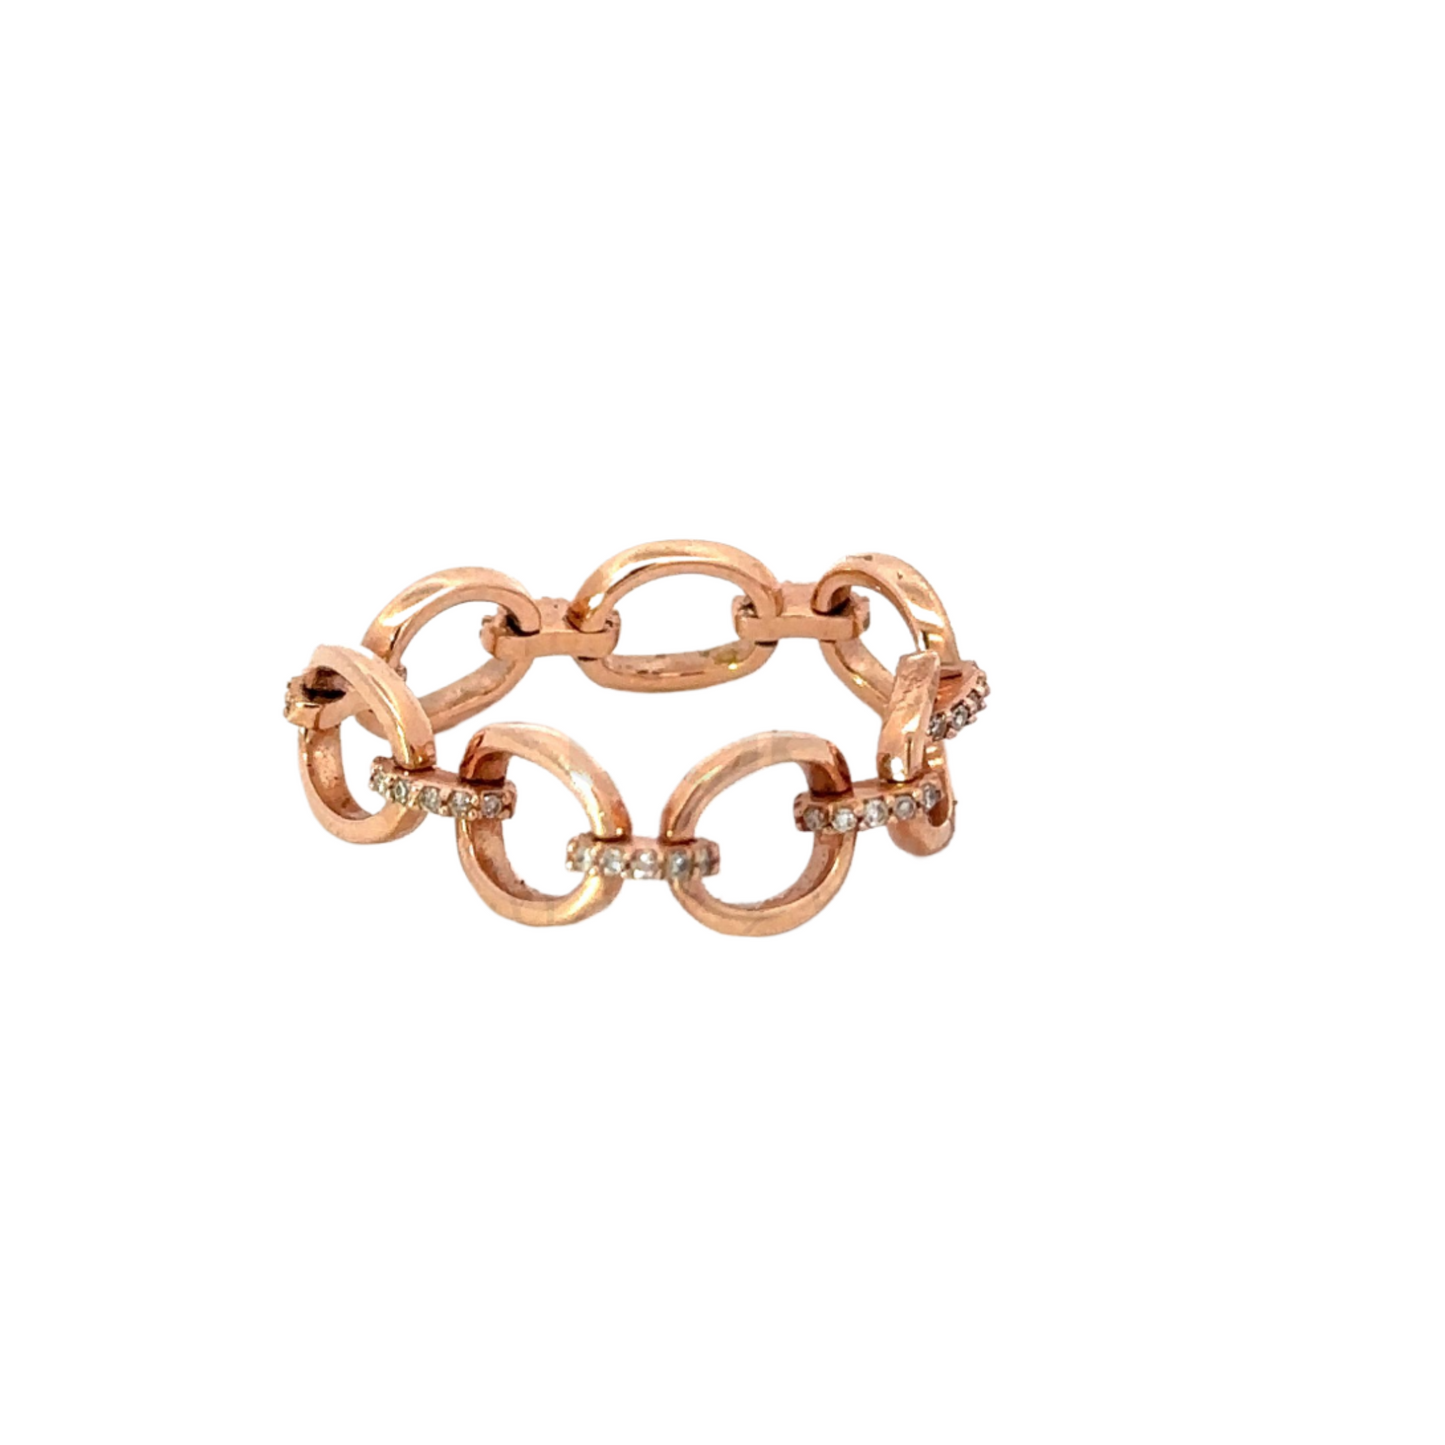 Flexible Chain Link Ring with Pave Diamond Accents